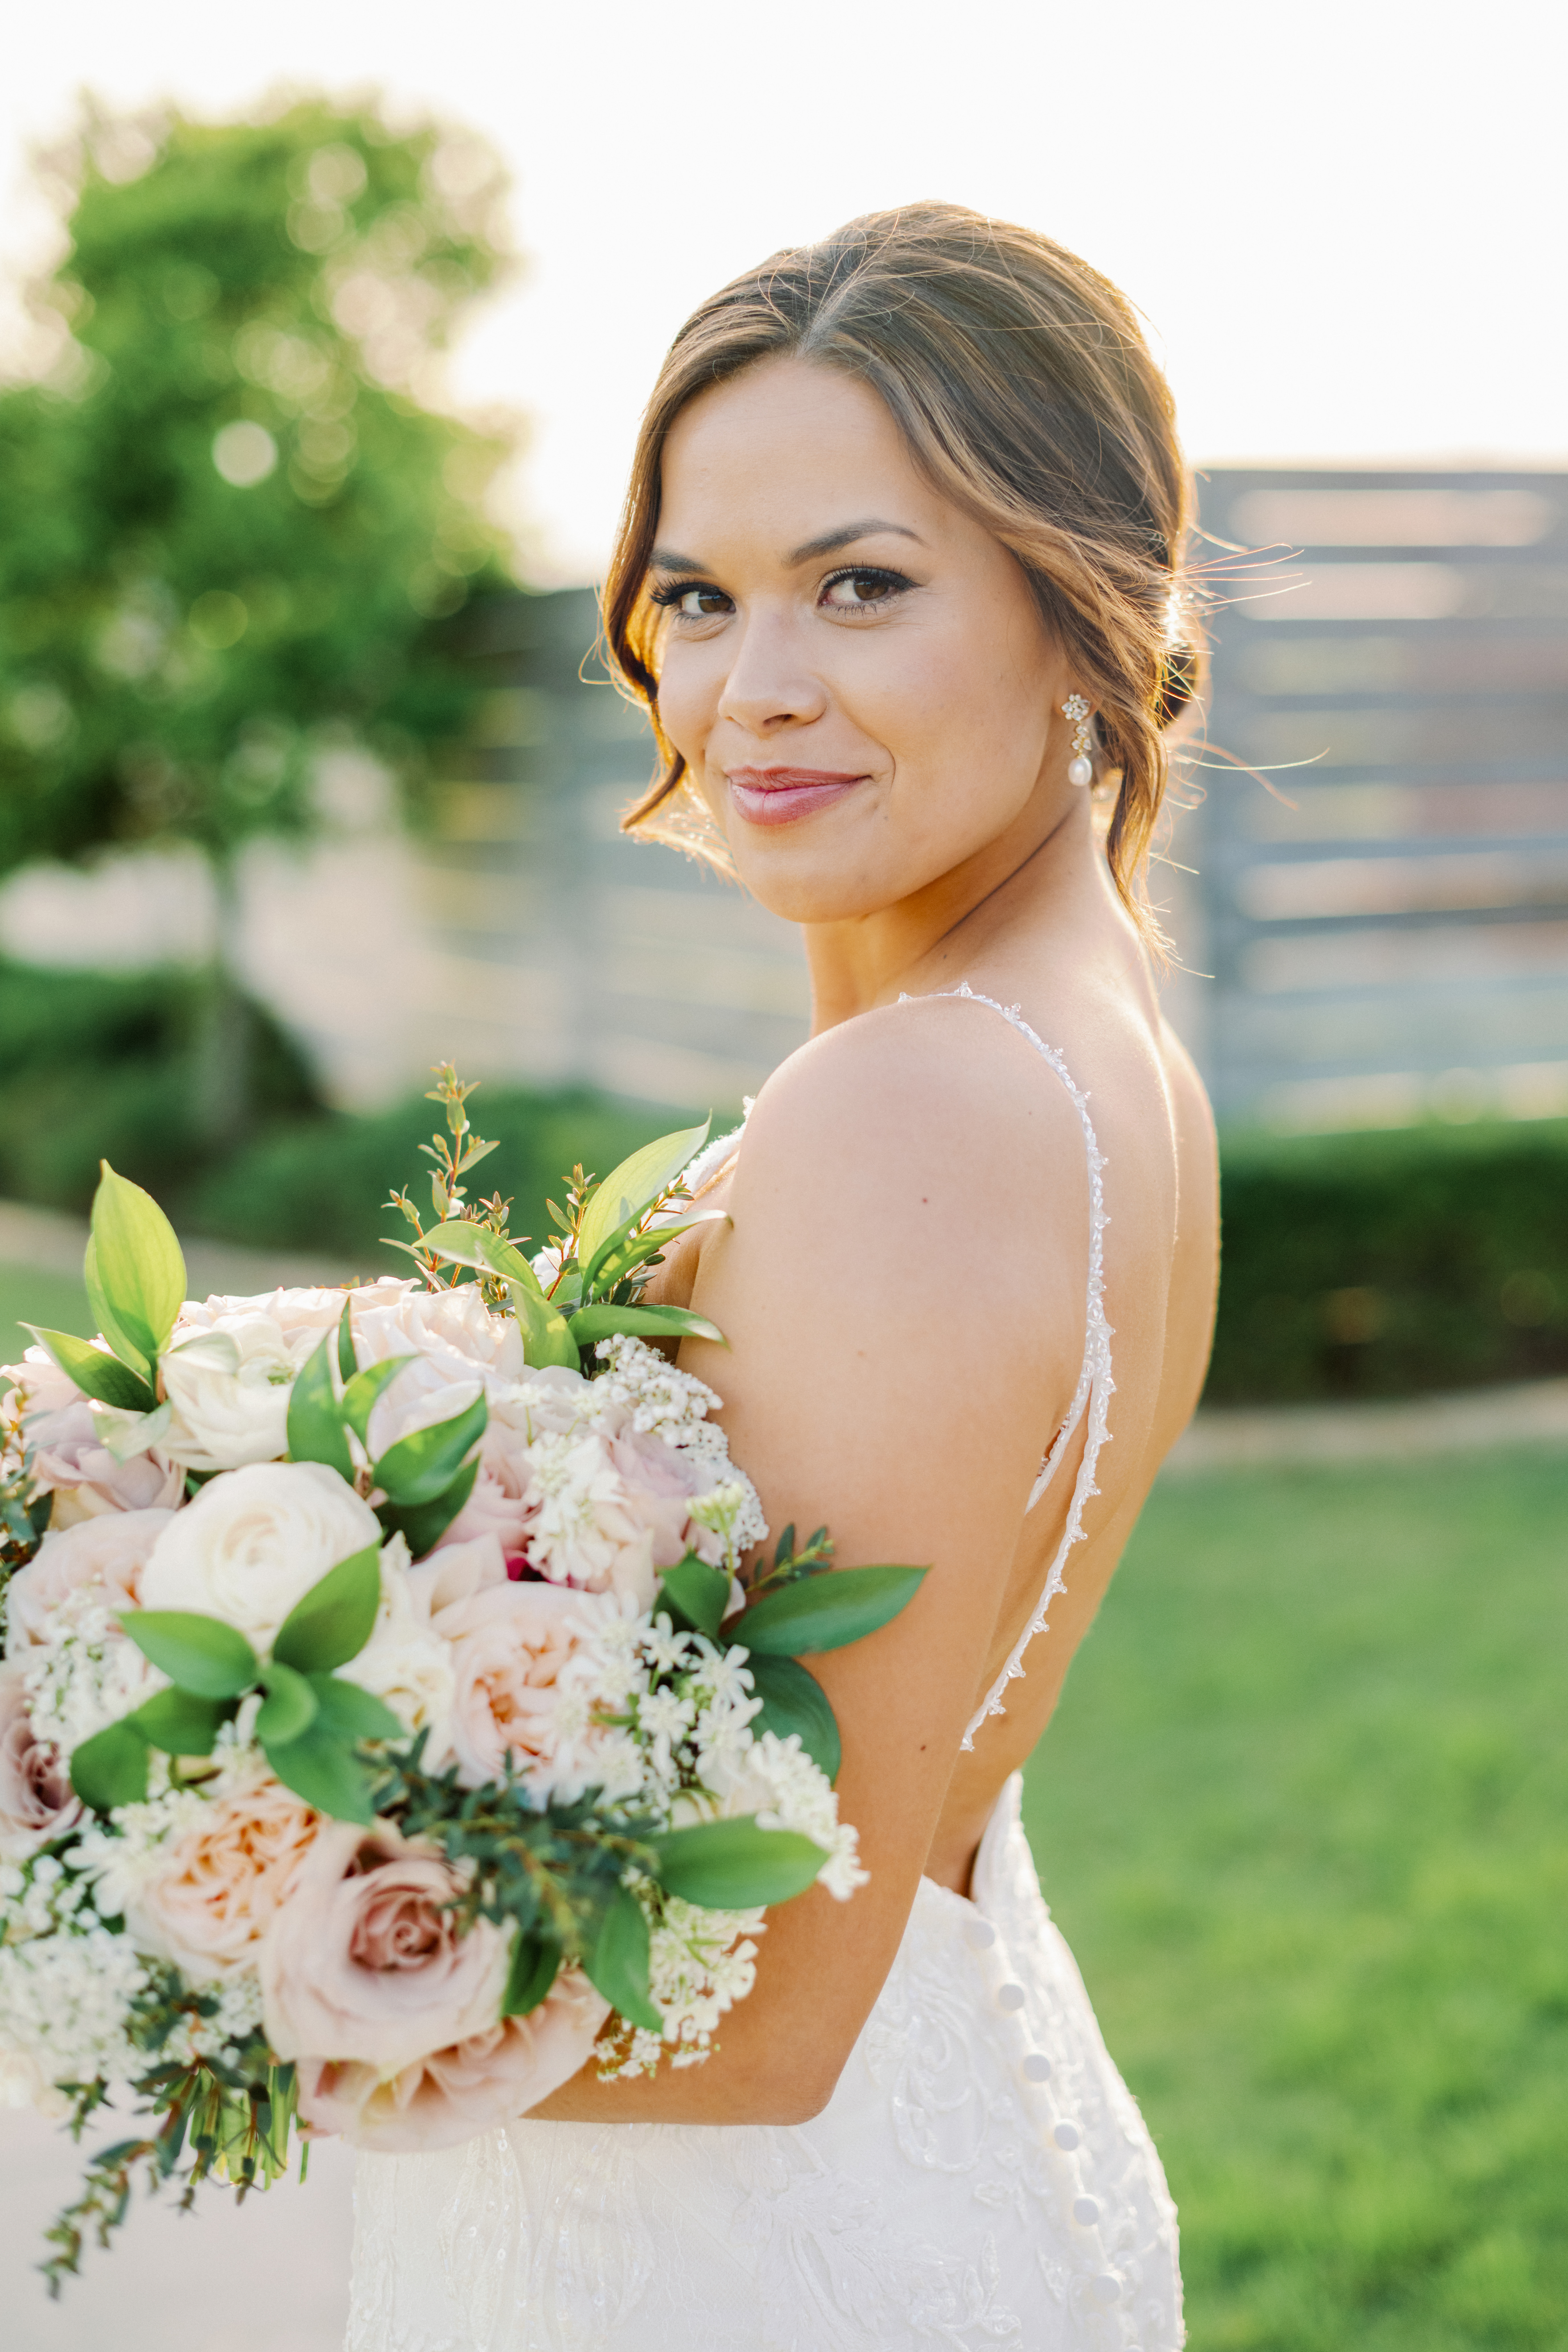 Bride Abbey poses for her bridals with Kati Hewitt Photography outdoors at Houston's The Farmhouse Wedding Venue